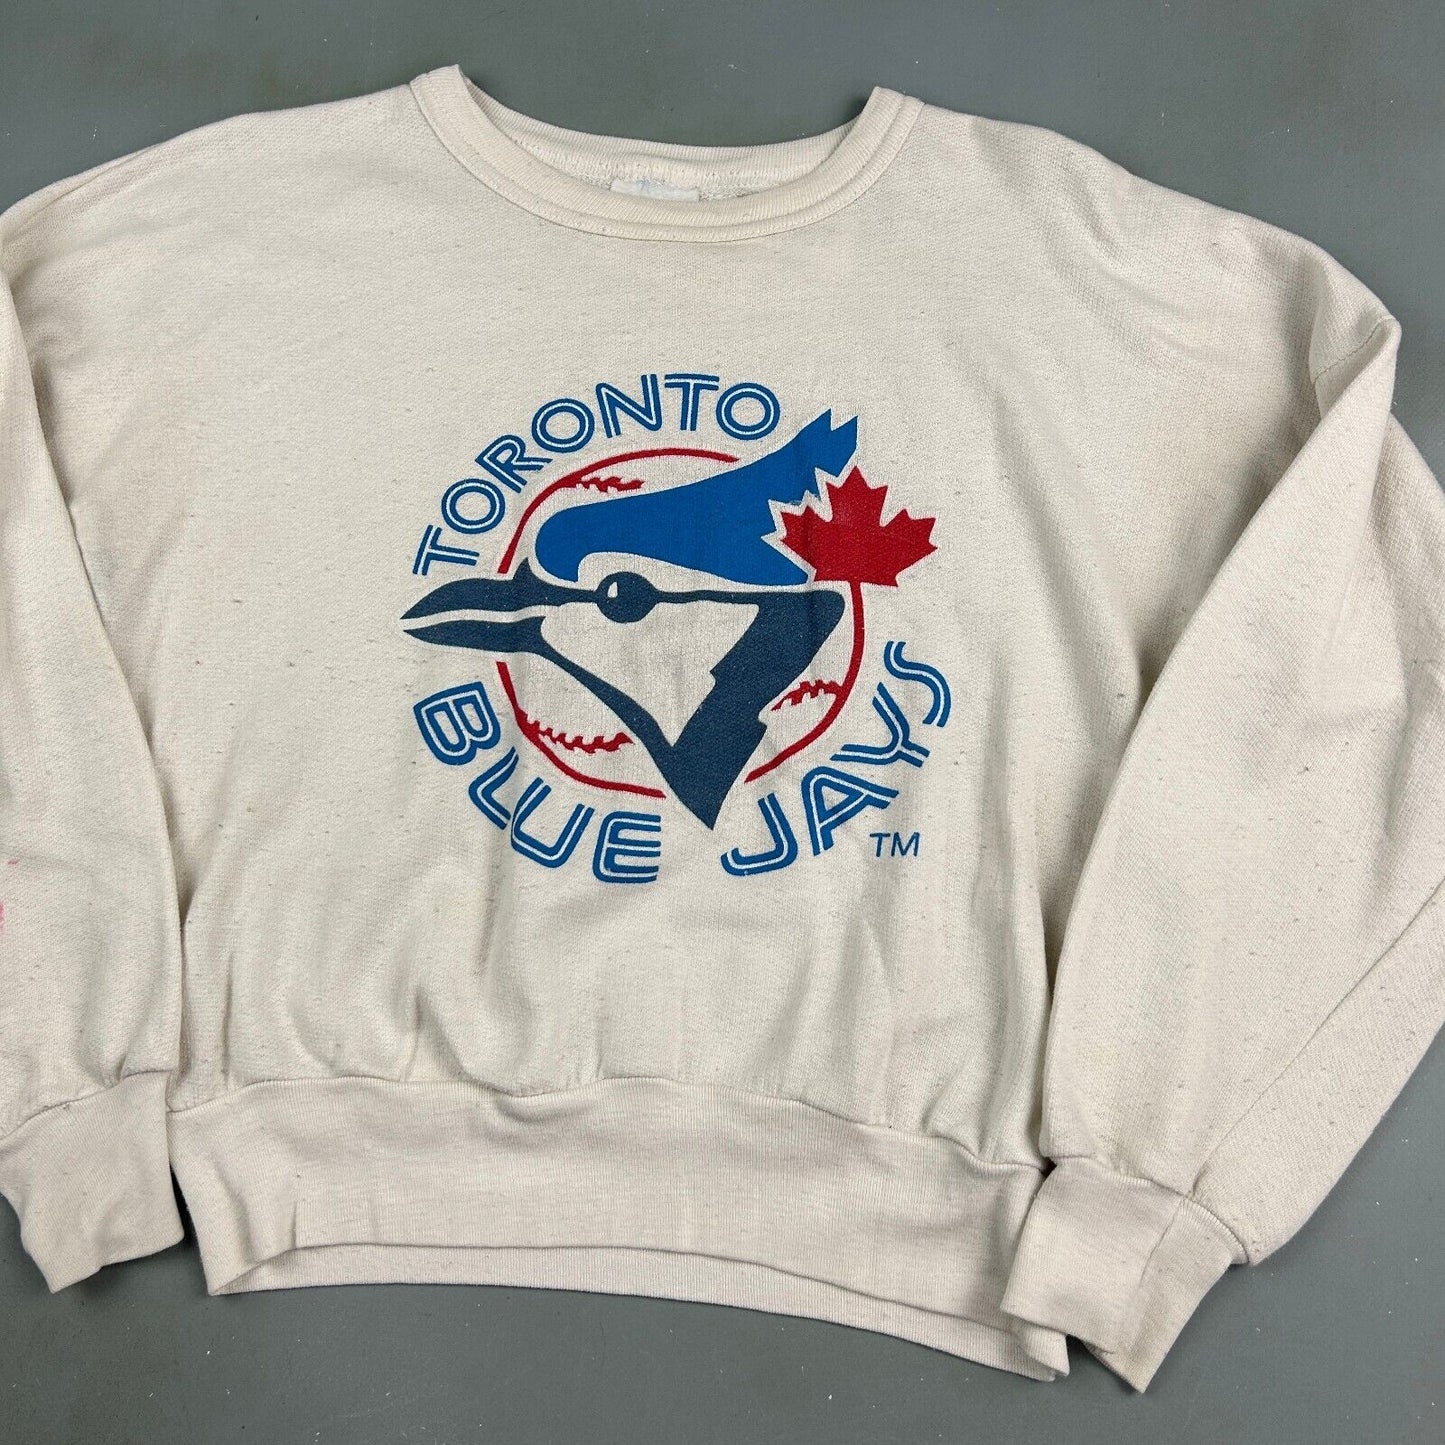 VINTAGE 80s Toronto Blue Jays White Sweater sz Small Short* Adult / Youth XL